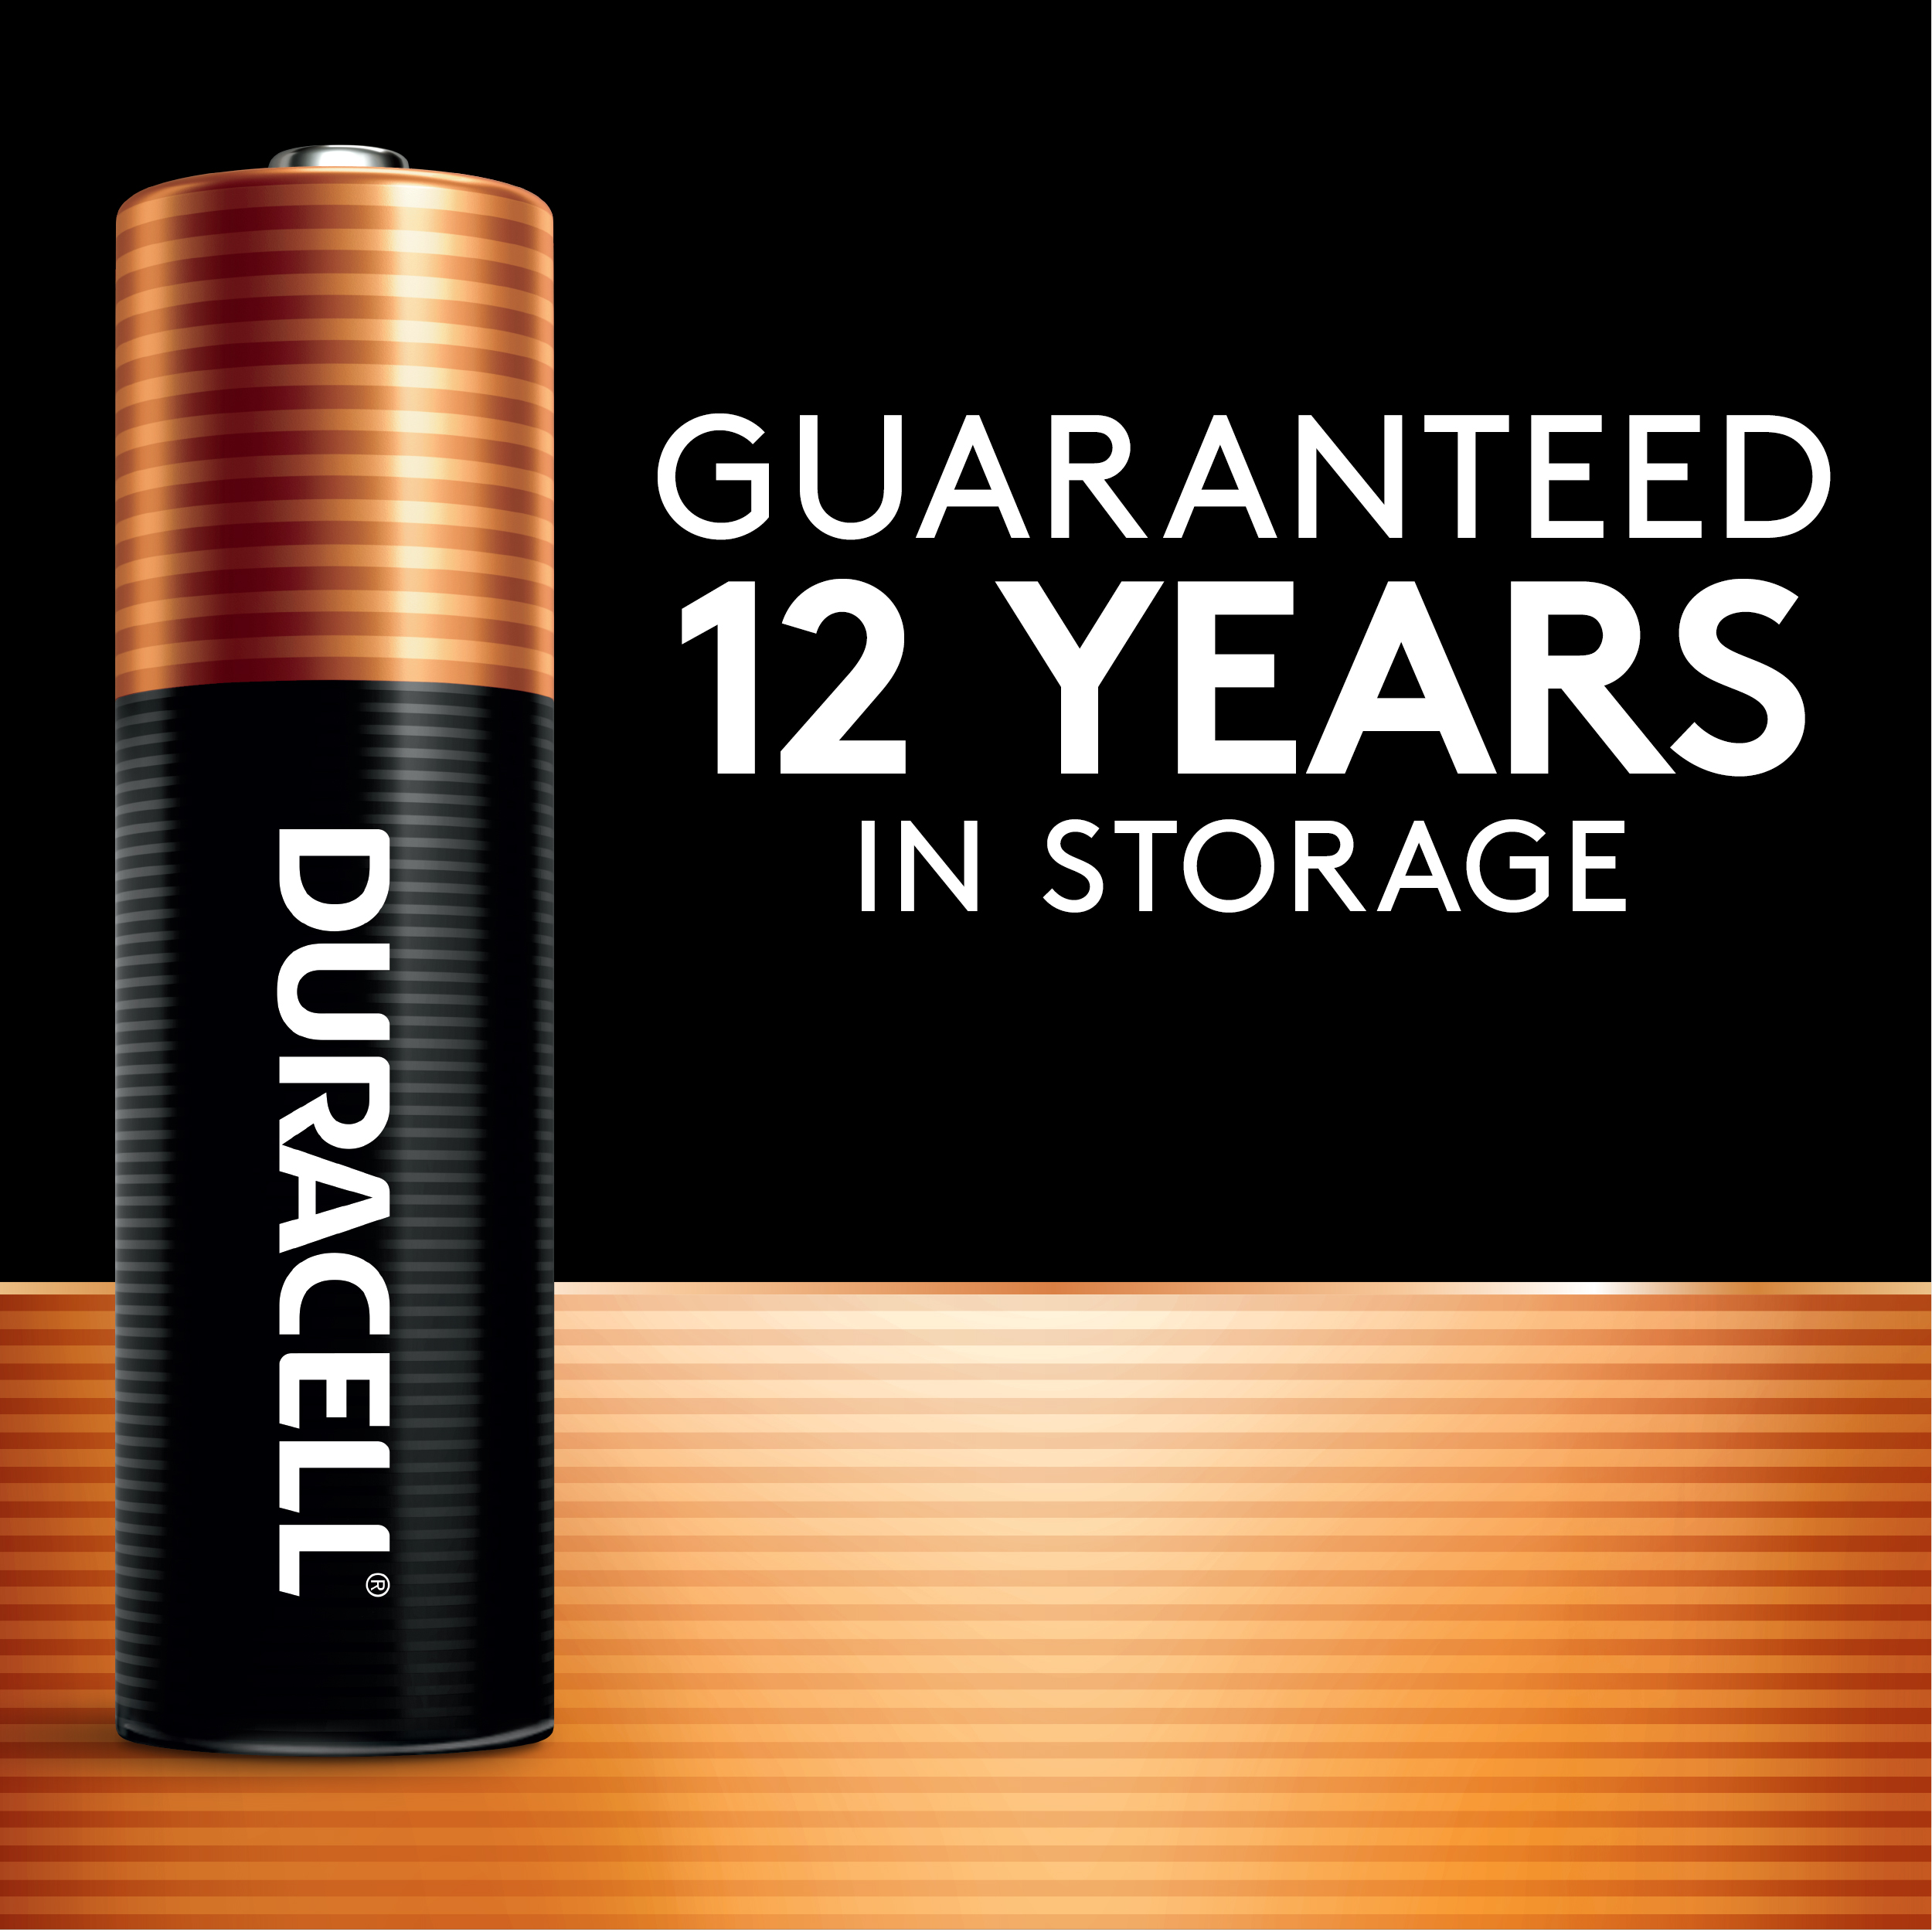 Duracell Coppertop AAA Battery with POWER BOOST™, 16 Pack Long-Lasting Batteries - image 5 of 9